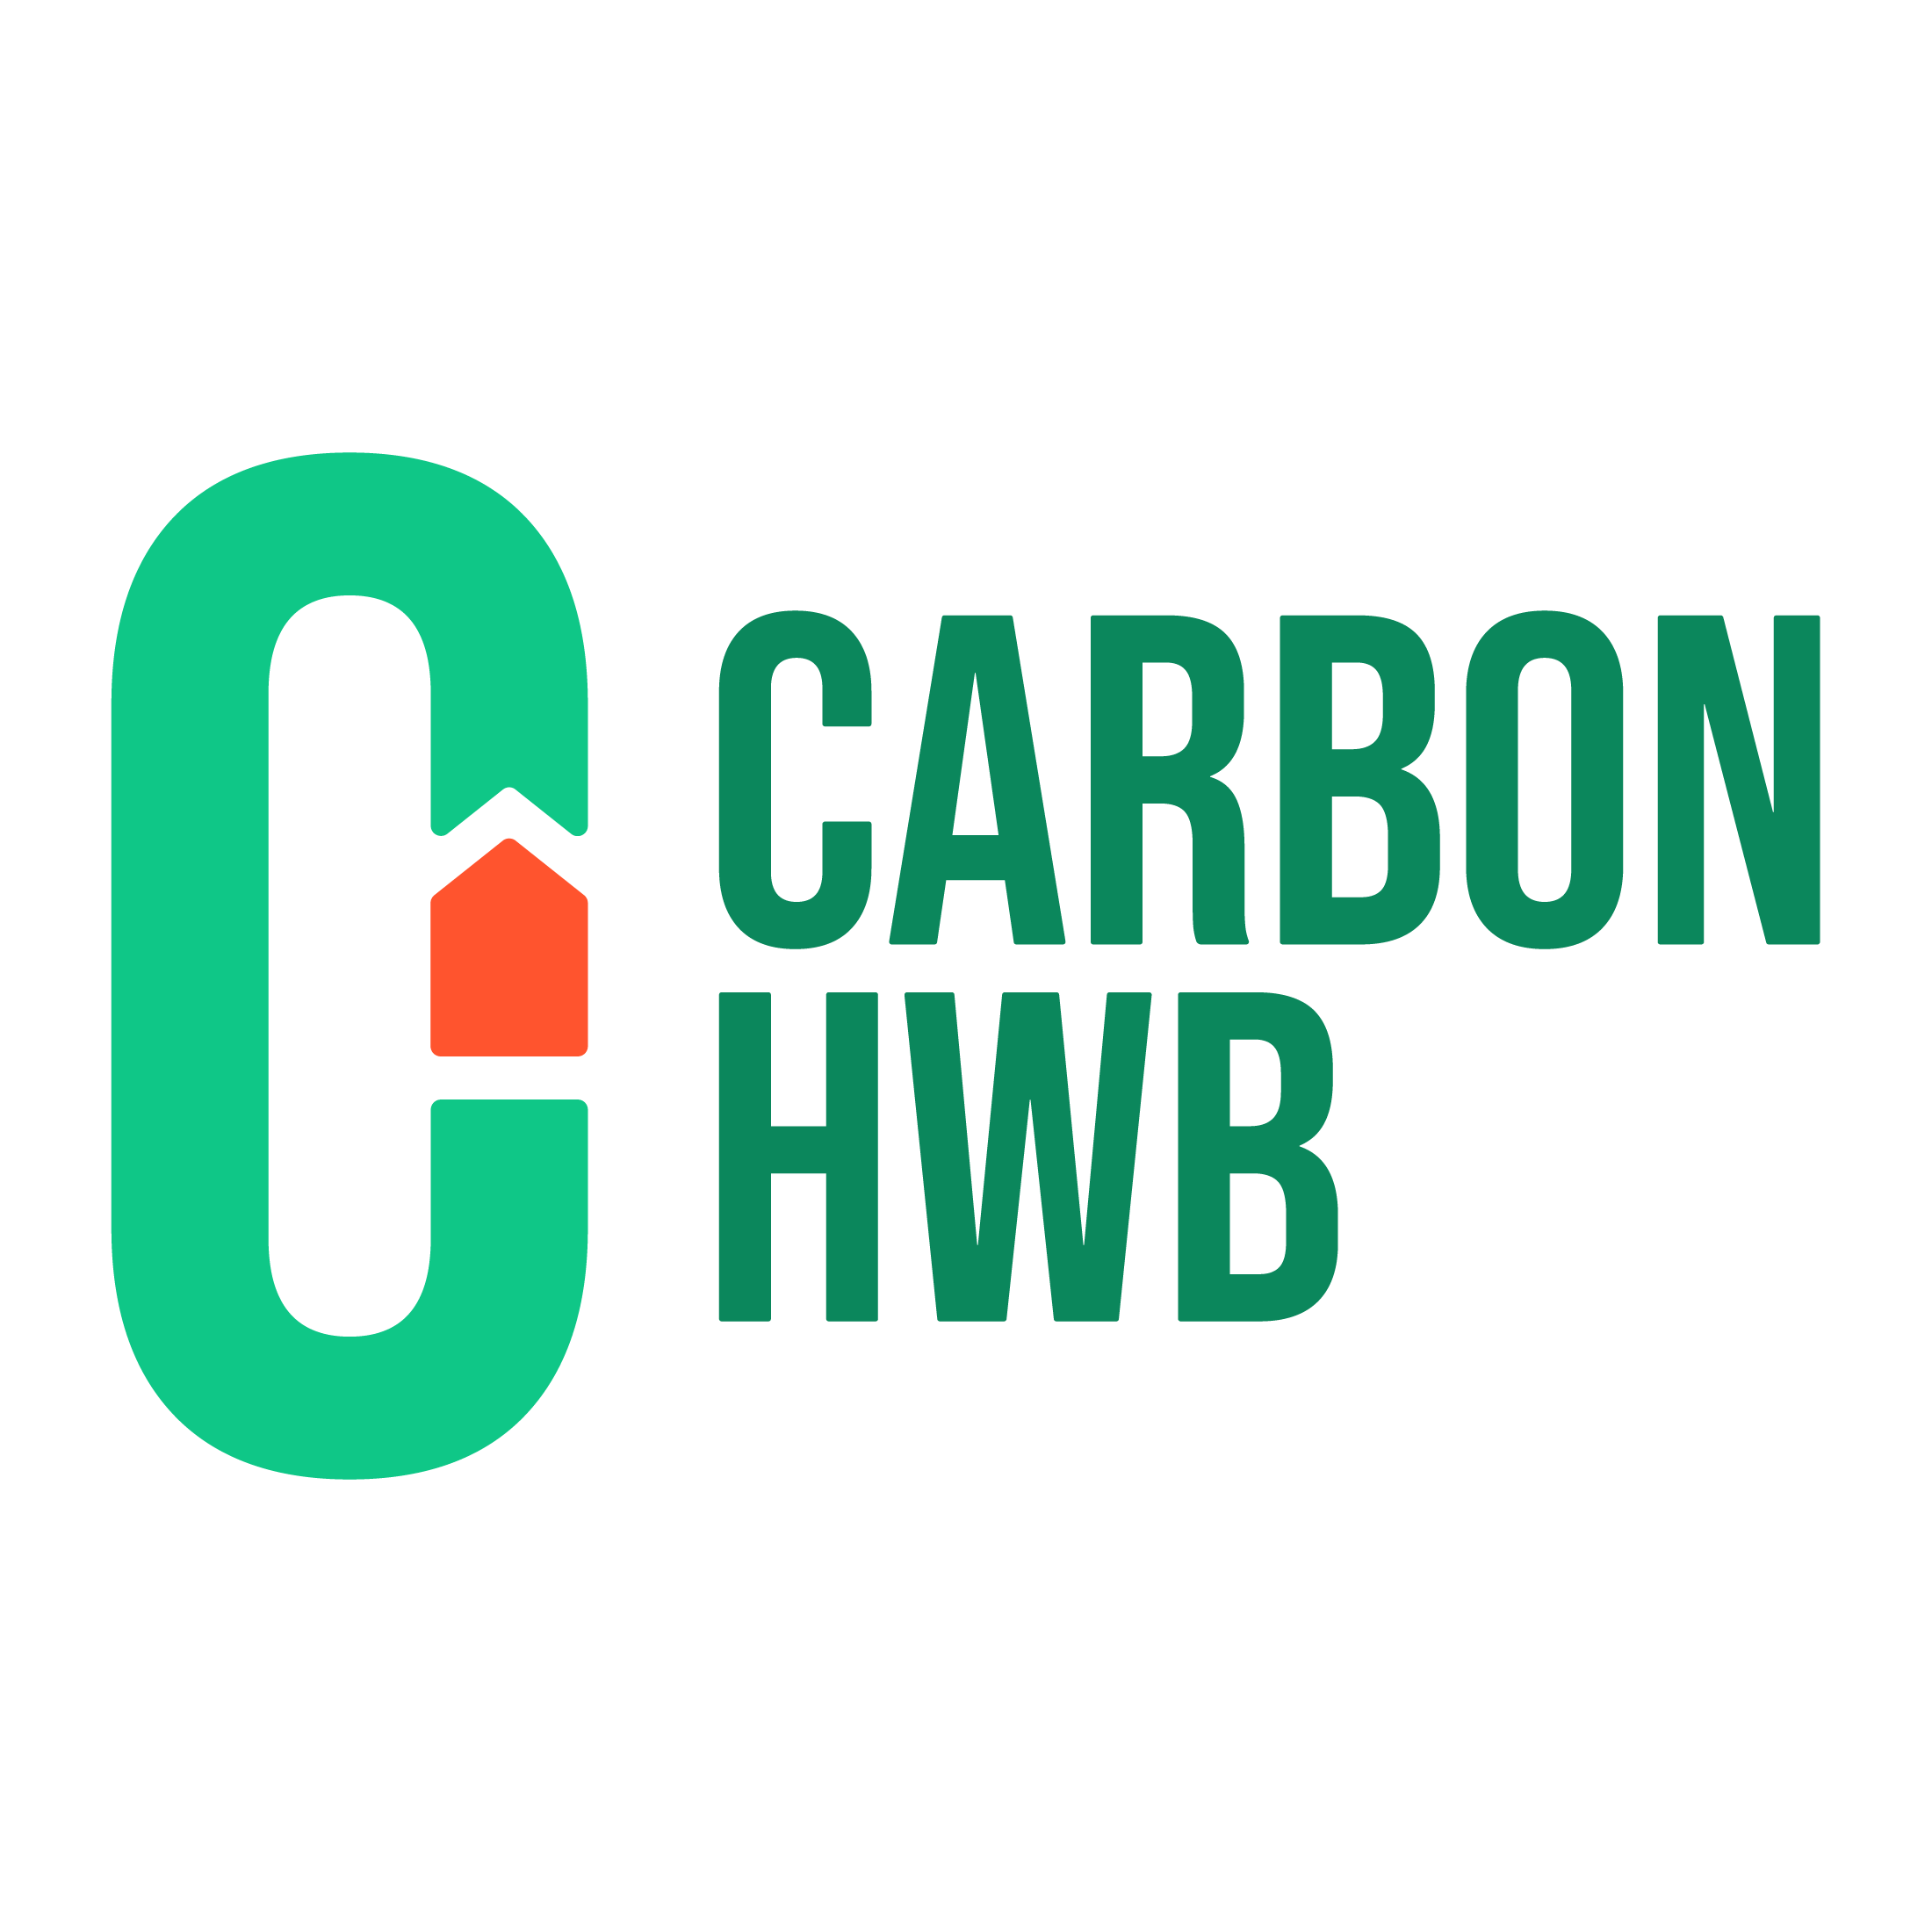 All-Wales Net Zero Carbon Hwb project to go live